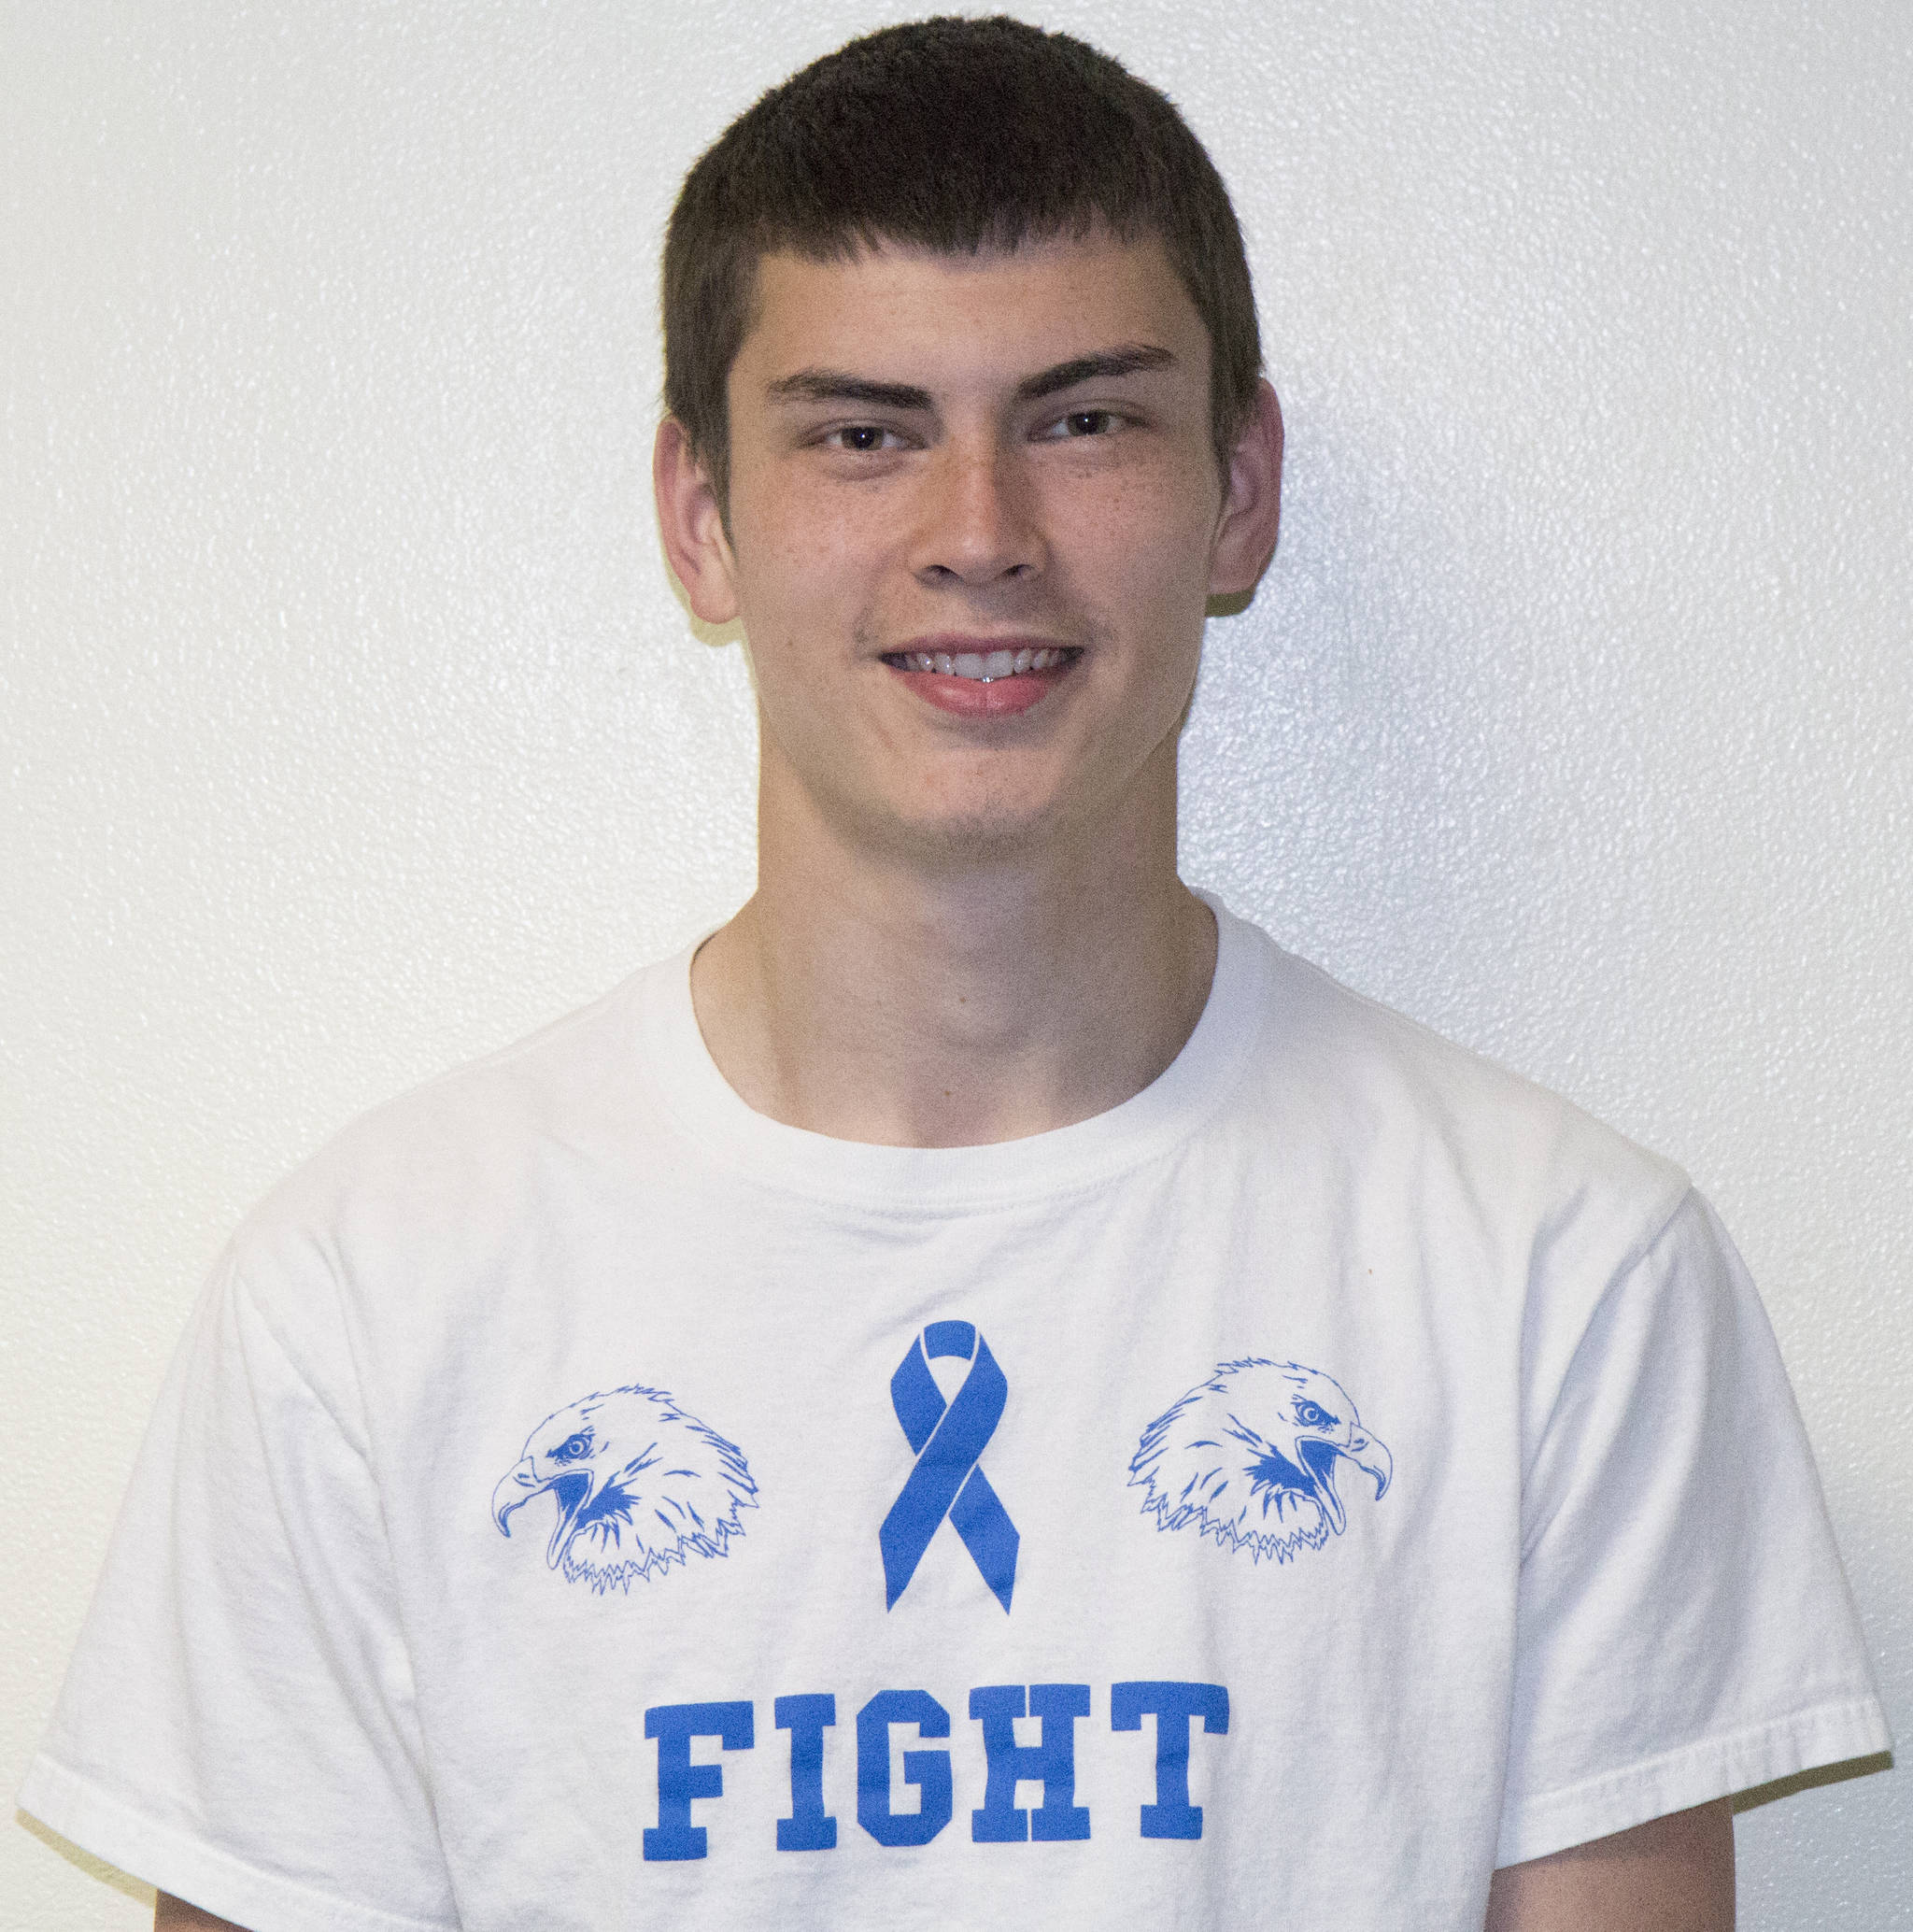 Athlete of the week, May 18